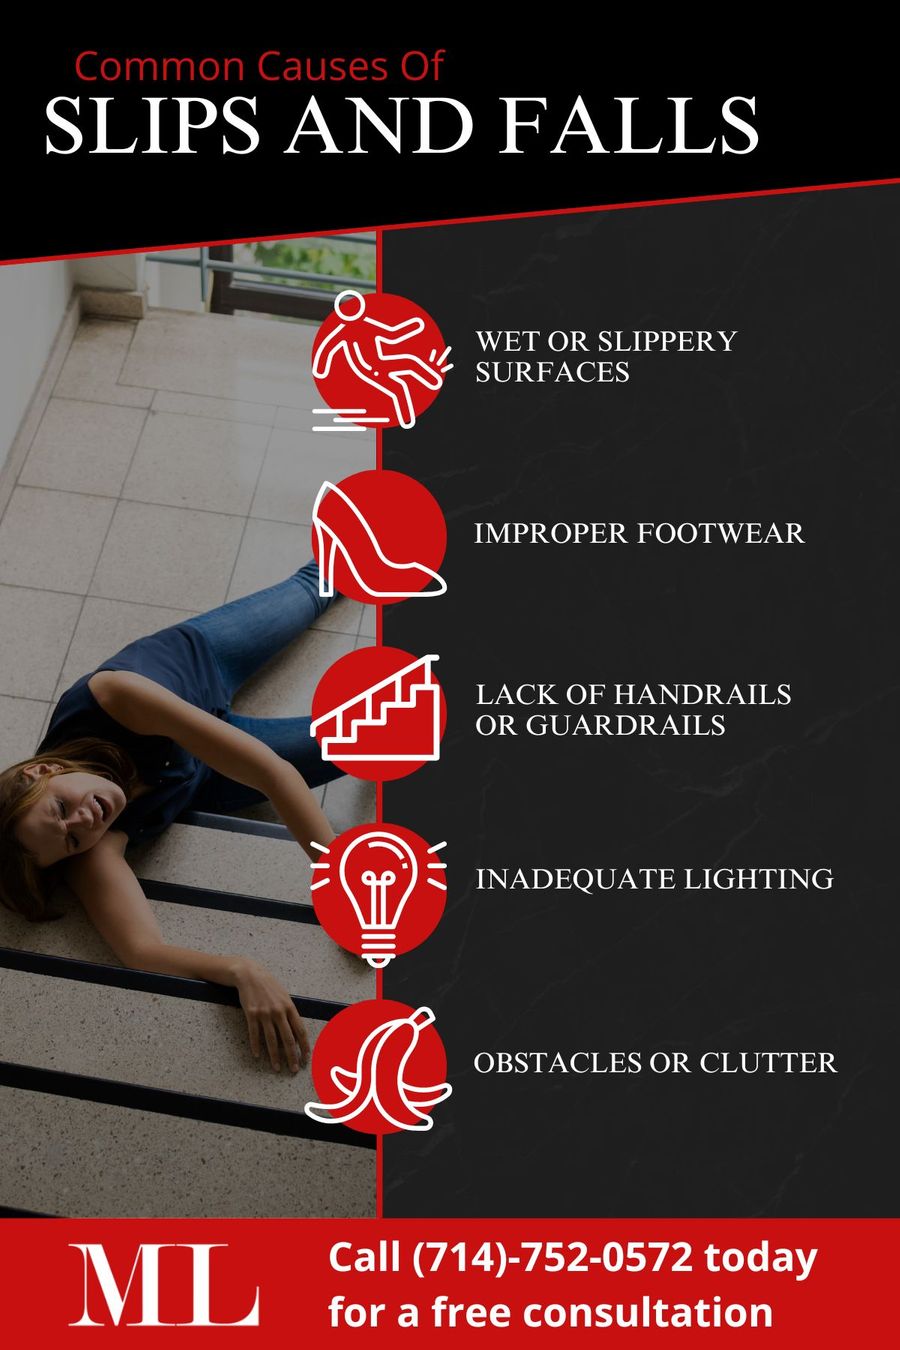 Common Causes Of Slips And Falls.jpg